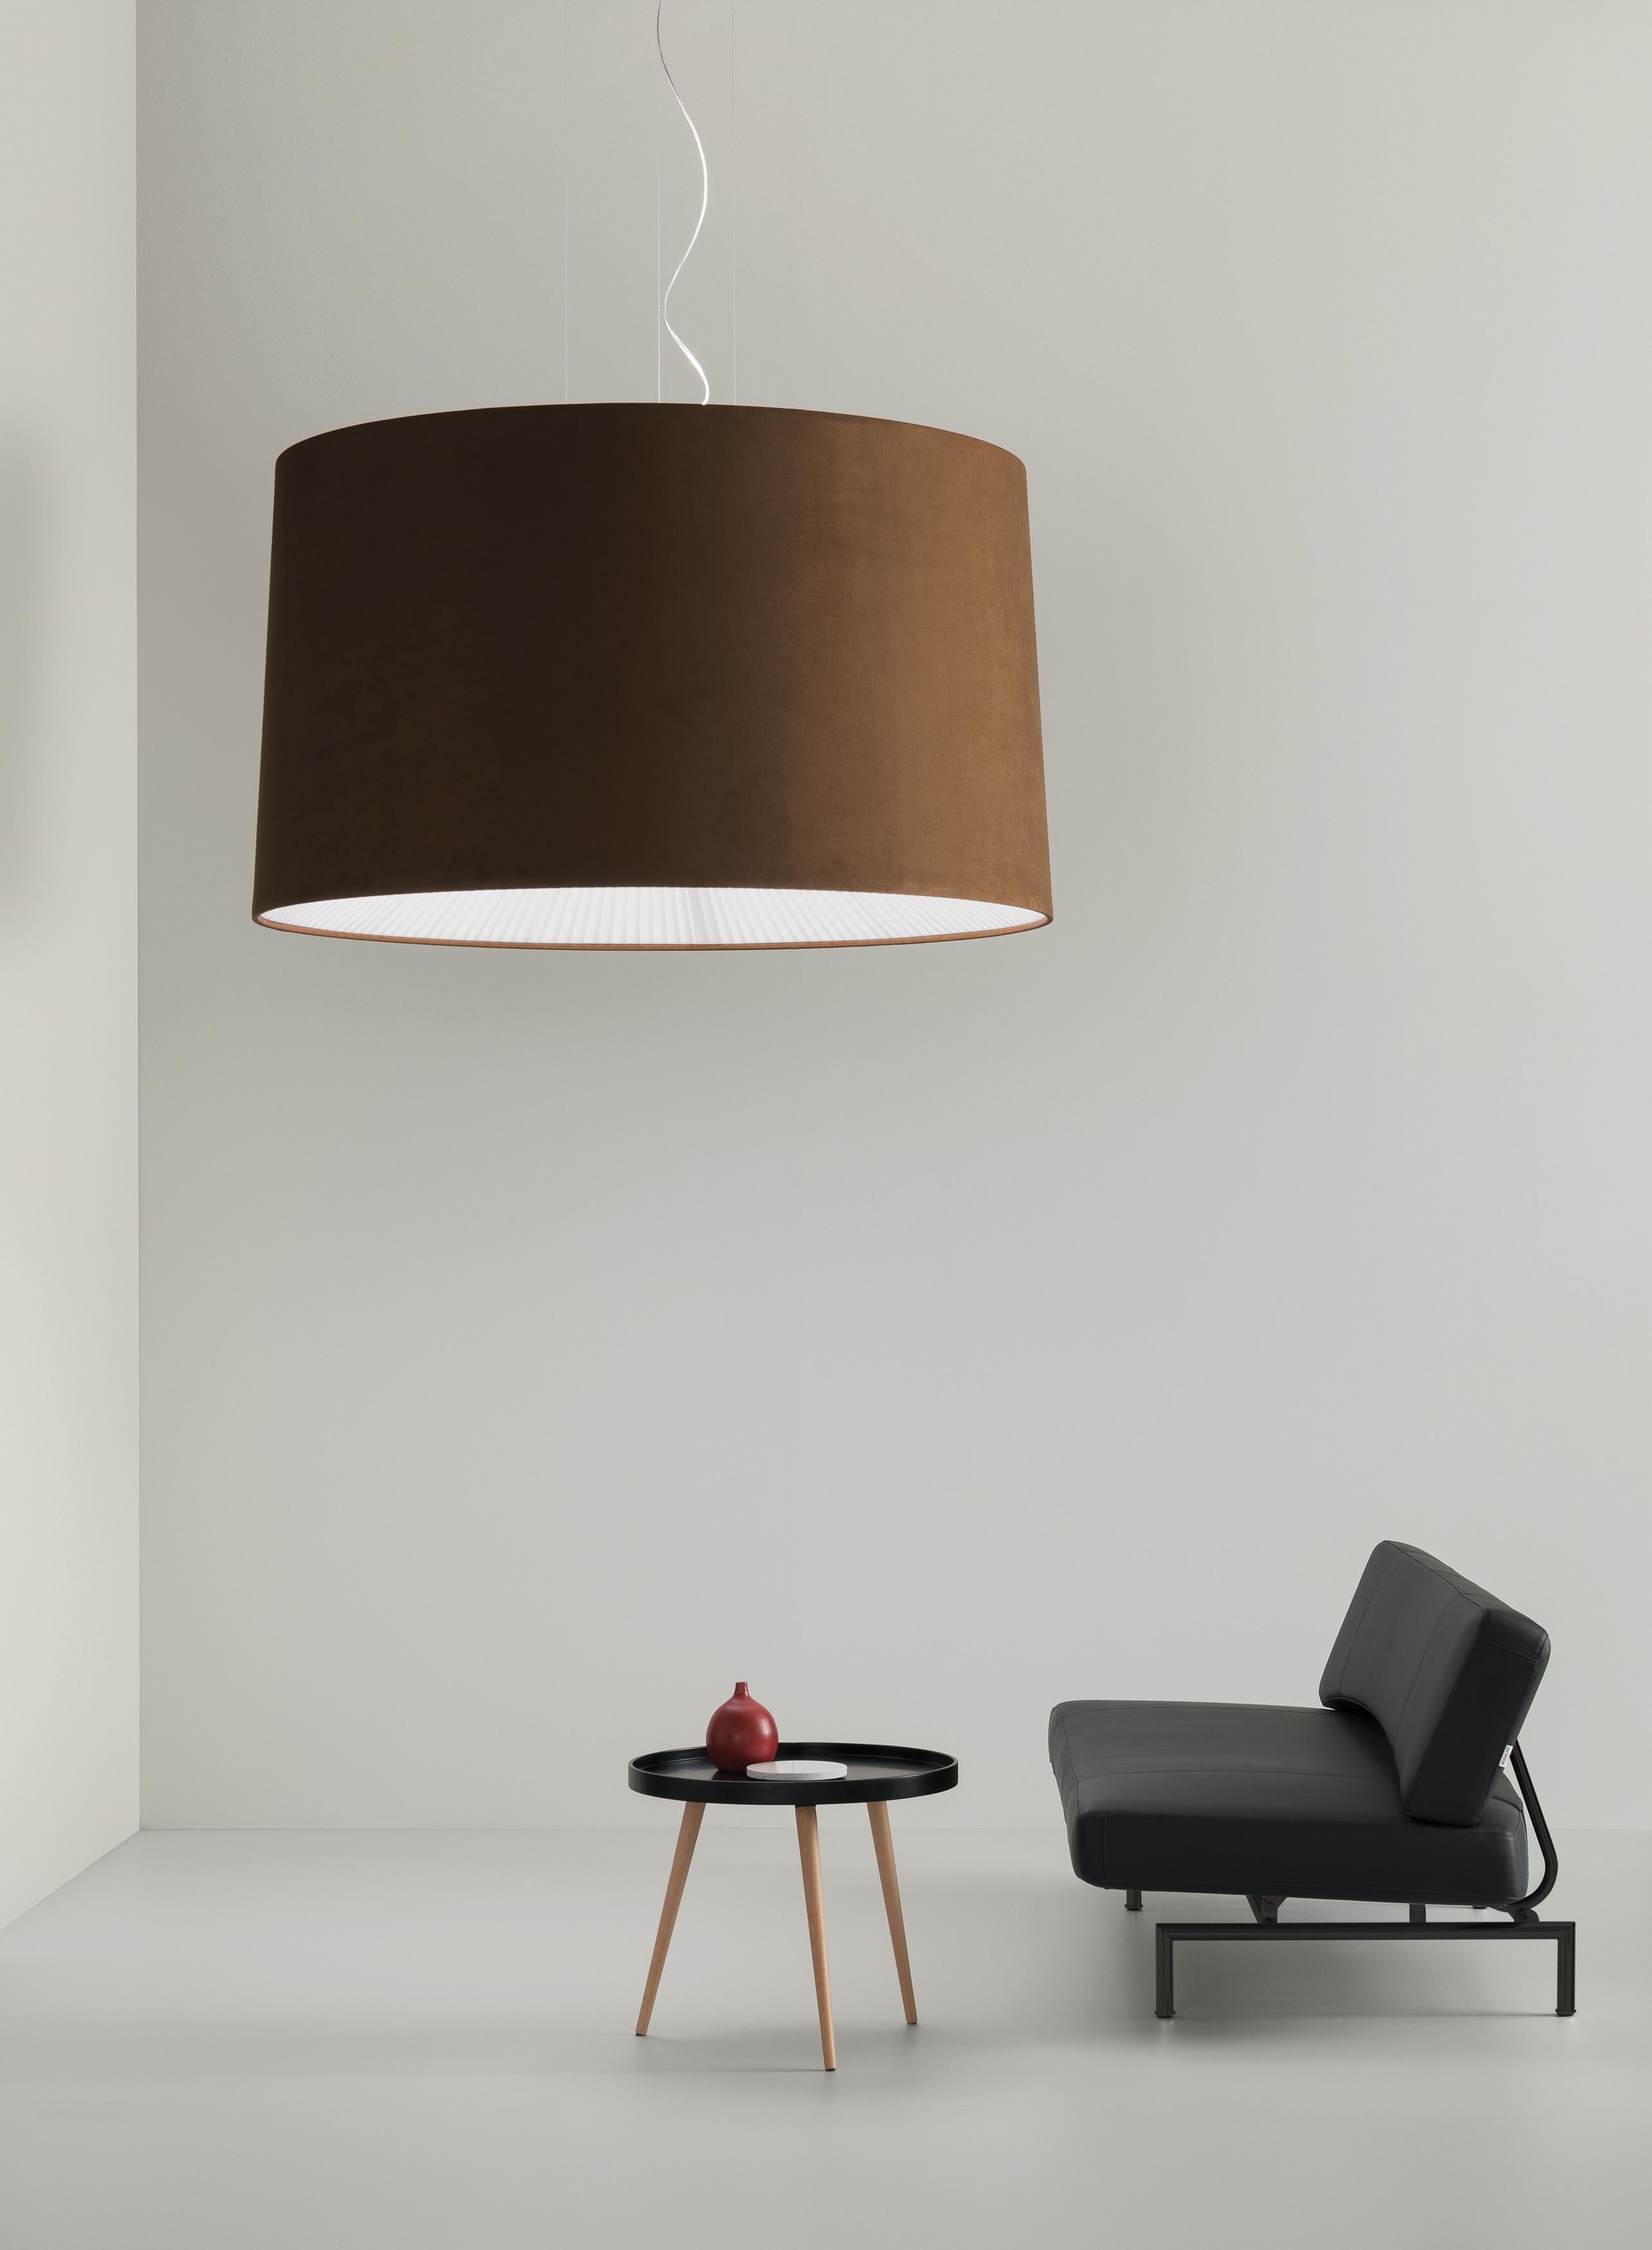 Axolight Large Velvet Pendant Lamp in Ivory by Manuel & Vanessa Vivian

The essential geometry, combined with the velvet-like texture, give life to Velvet. A collection full of charm and timeless elegance. The simplicity of its timeless design, the